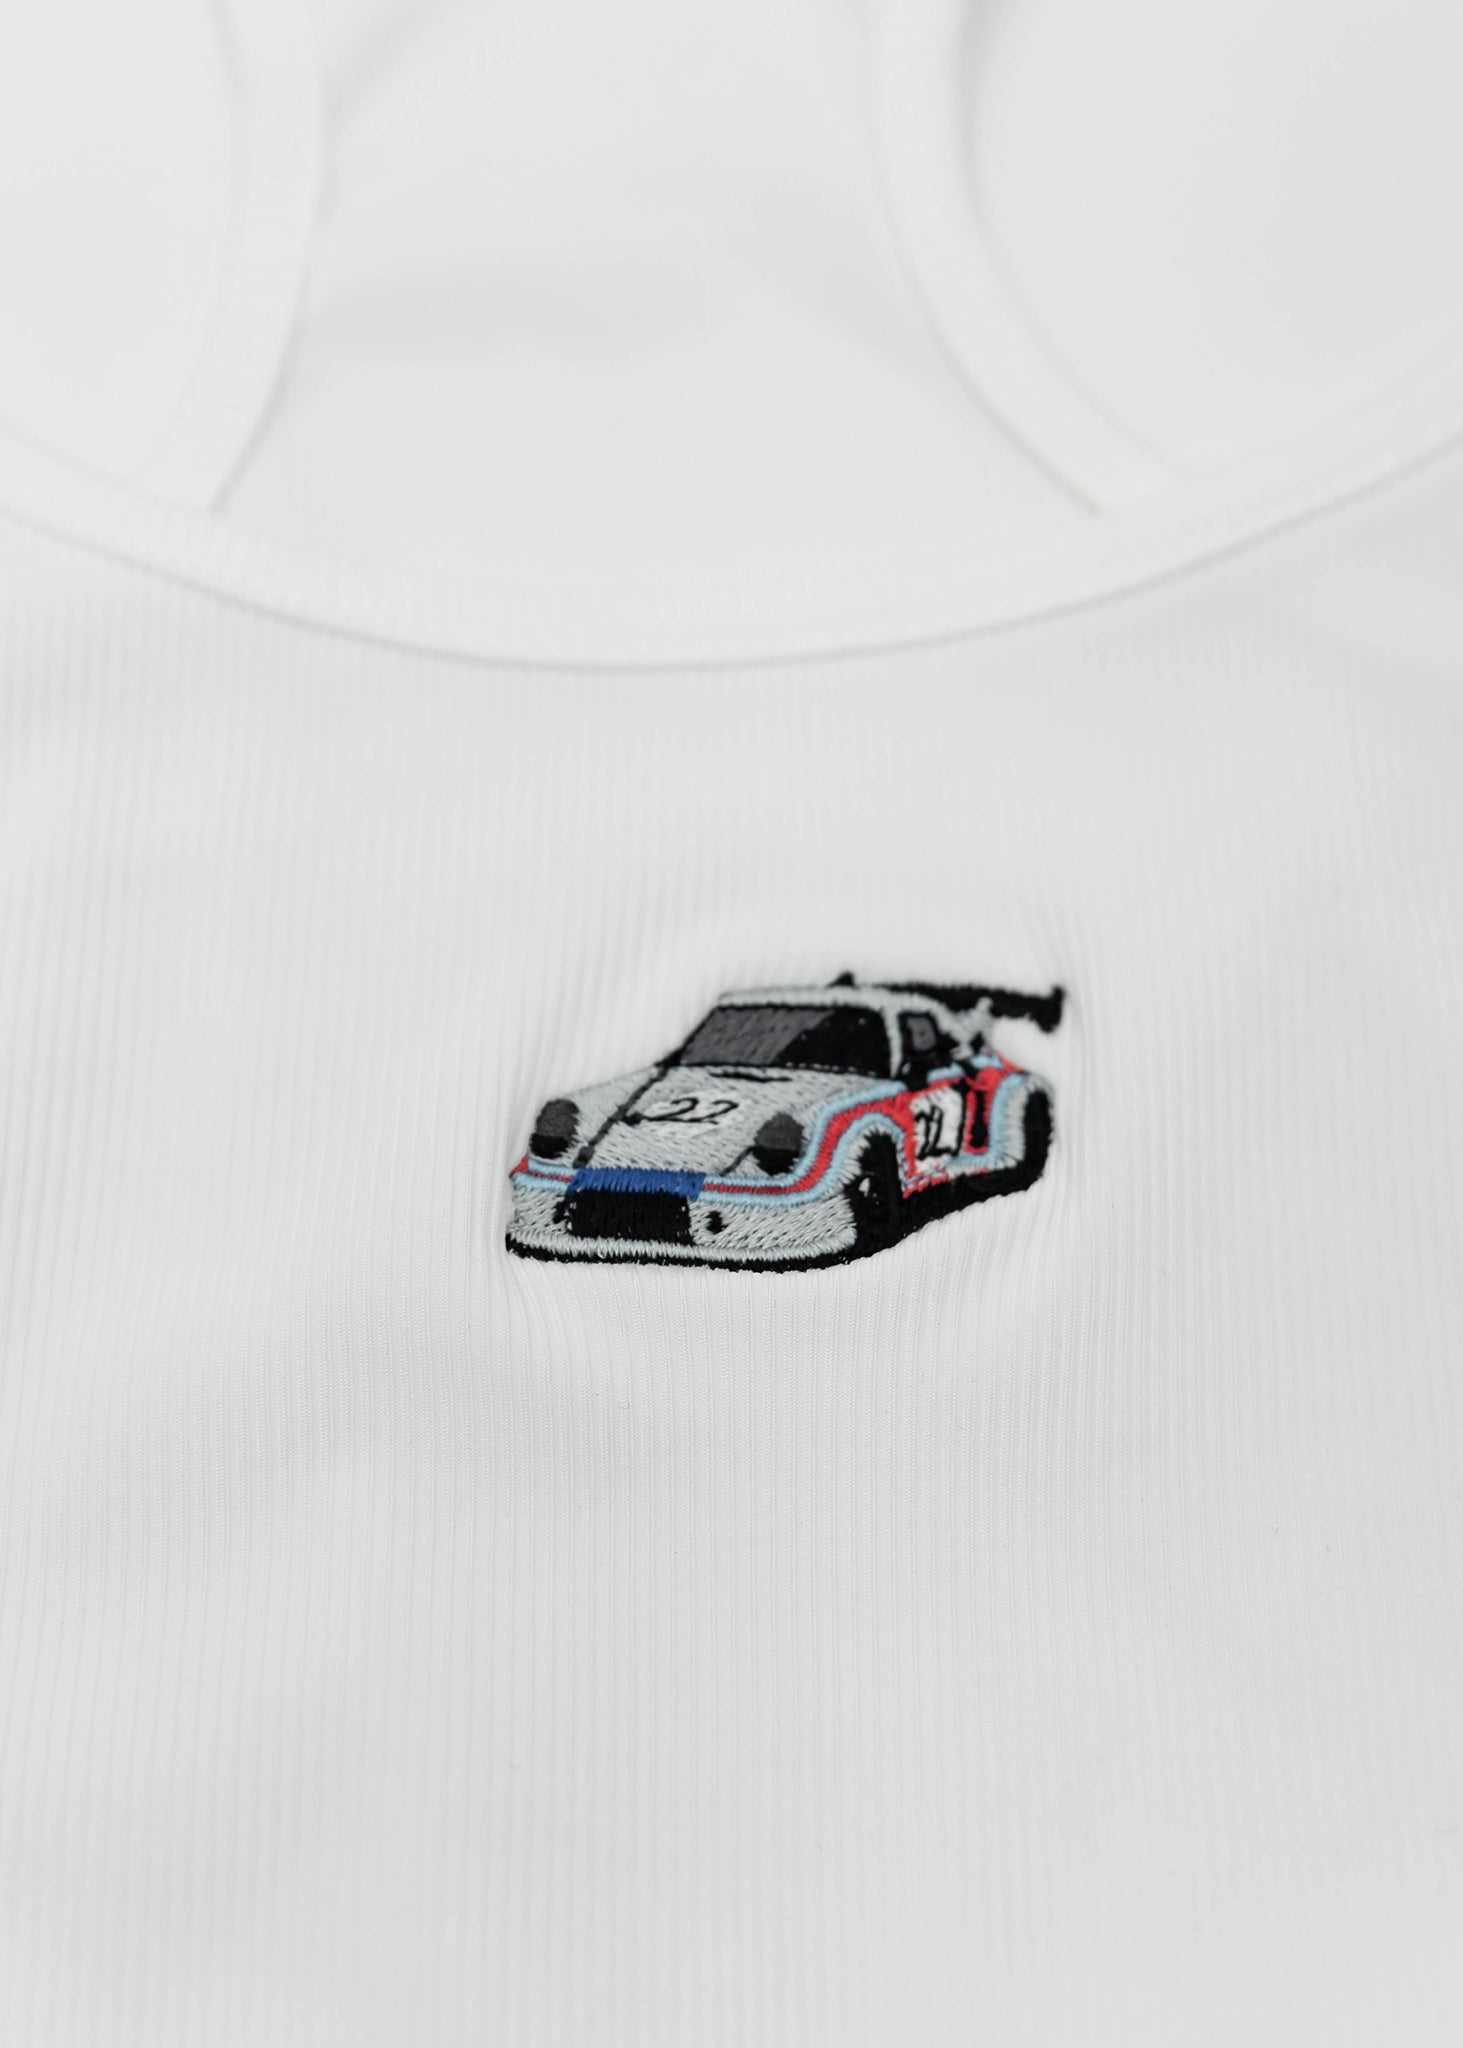 Close up of an embroidered R13 1974 911 RSR Turbo on a women's high quality ribbed racer back crop top. Photo shows the detailed embroidery of a R13 1974 911 RSR Turbo. Fabric composition of this tee is 95% polyester, and 5% elastane. The material is very stretchy, and form fitting. The style of this shirt is scoop neck, sleeveless, cropped at the waist, with embroidery in the middle.